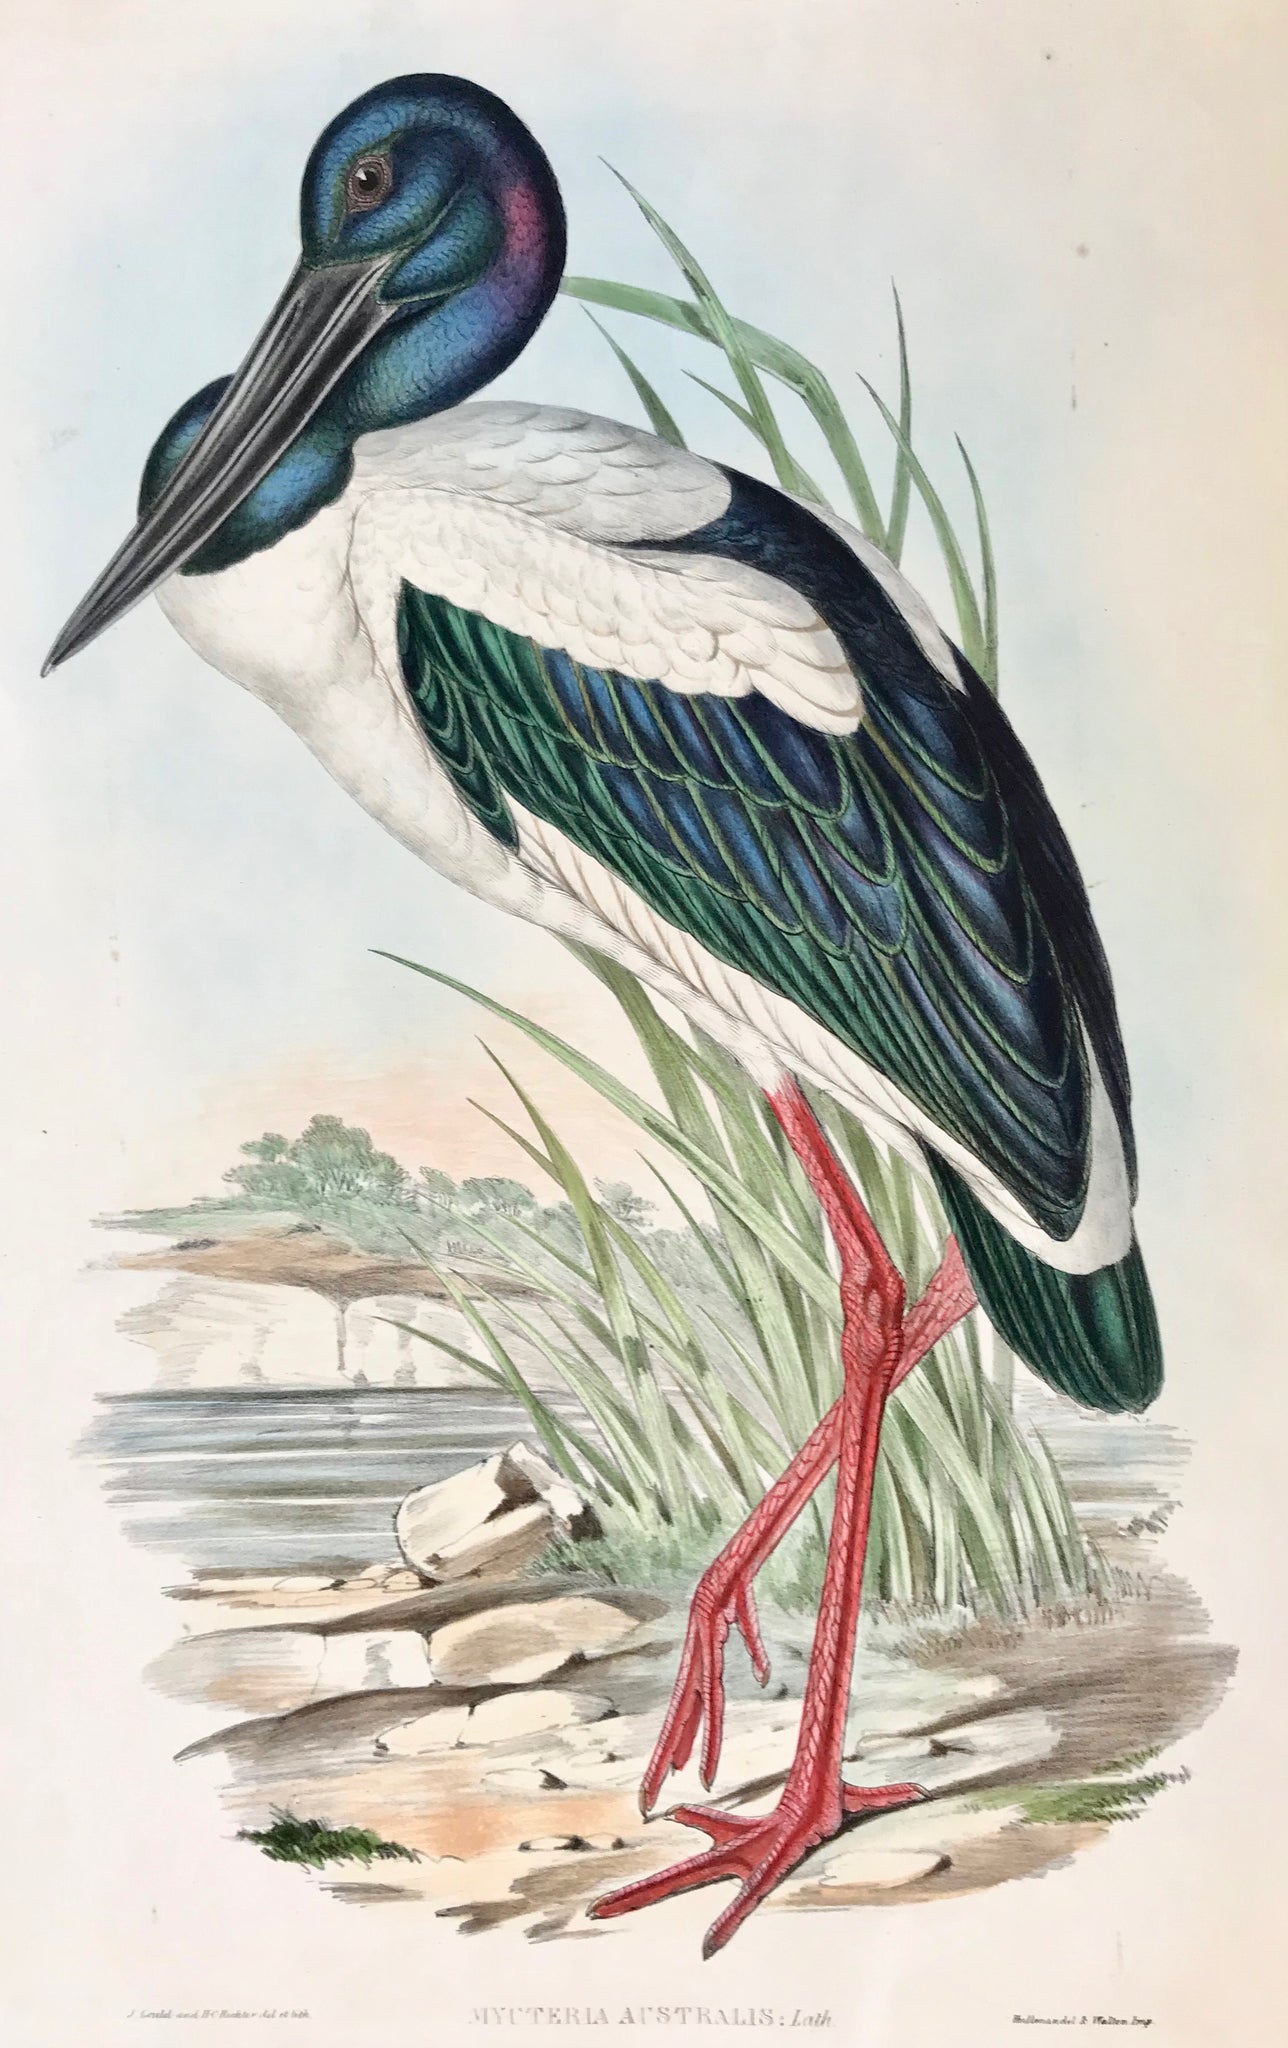 "Mycteria Australis: Lath" Original hand-colored lithograph by John Gould and H.C: Richter, 1837-1838. From "The Birds of Australia and Adjacent Islands". In the lower left corner is a carefully repaired tear using paper paste. 